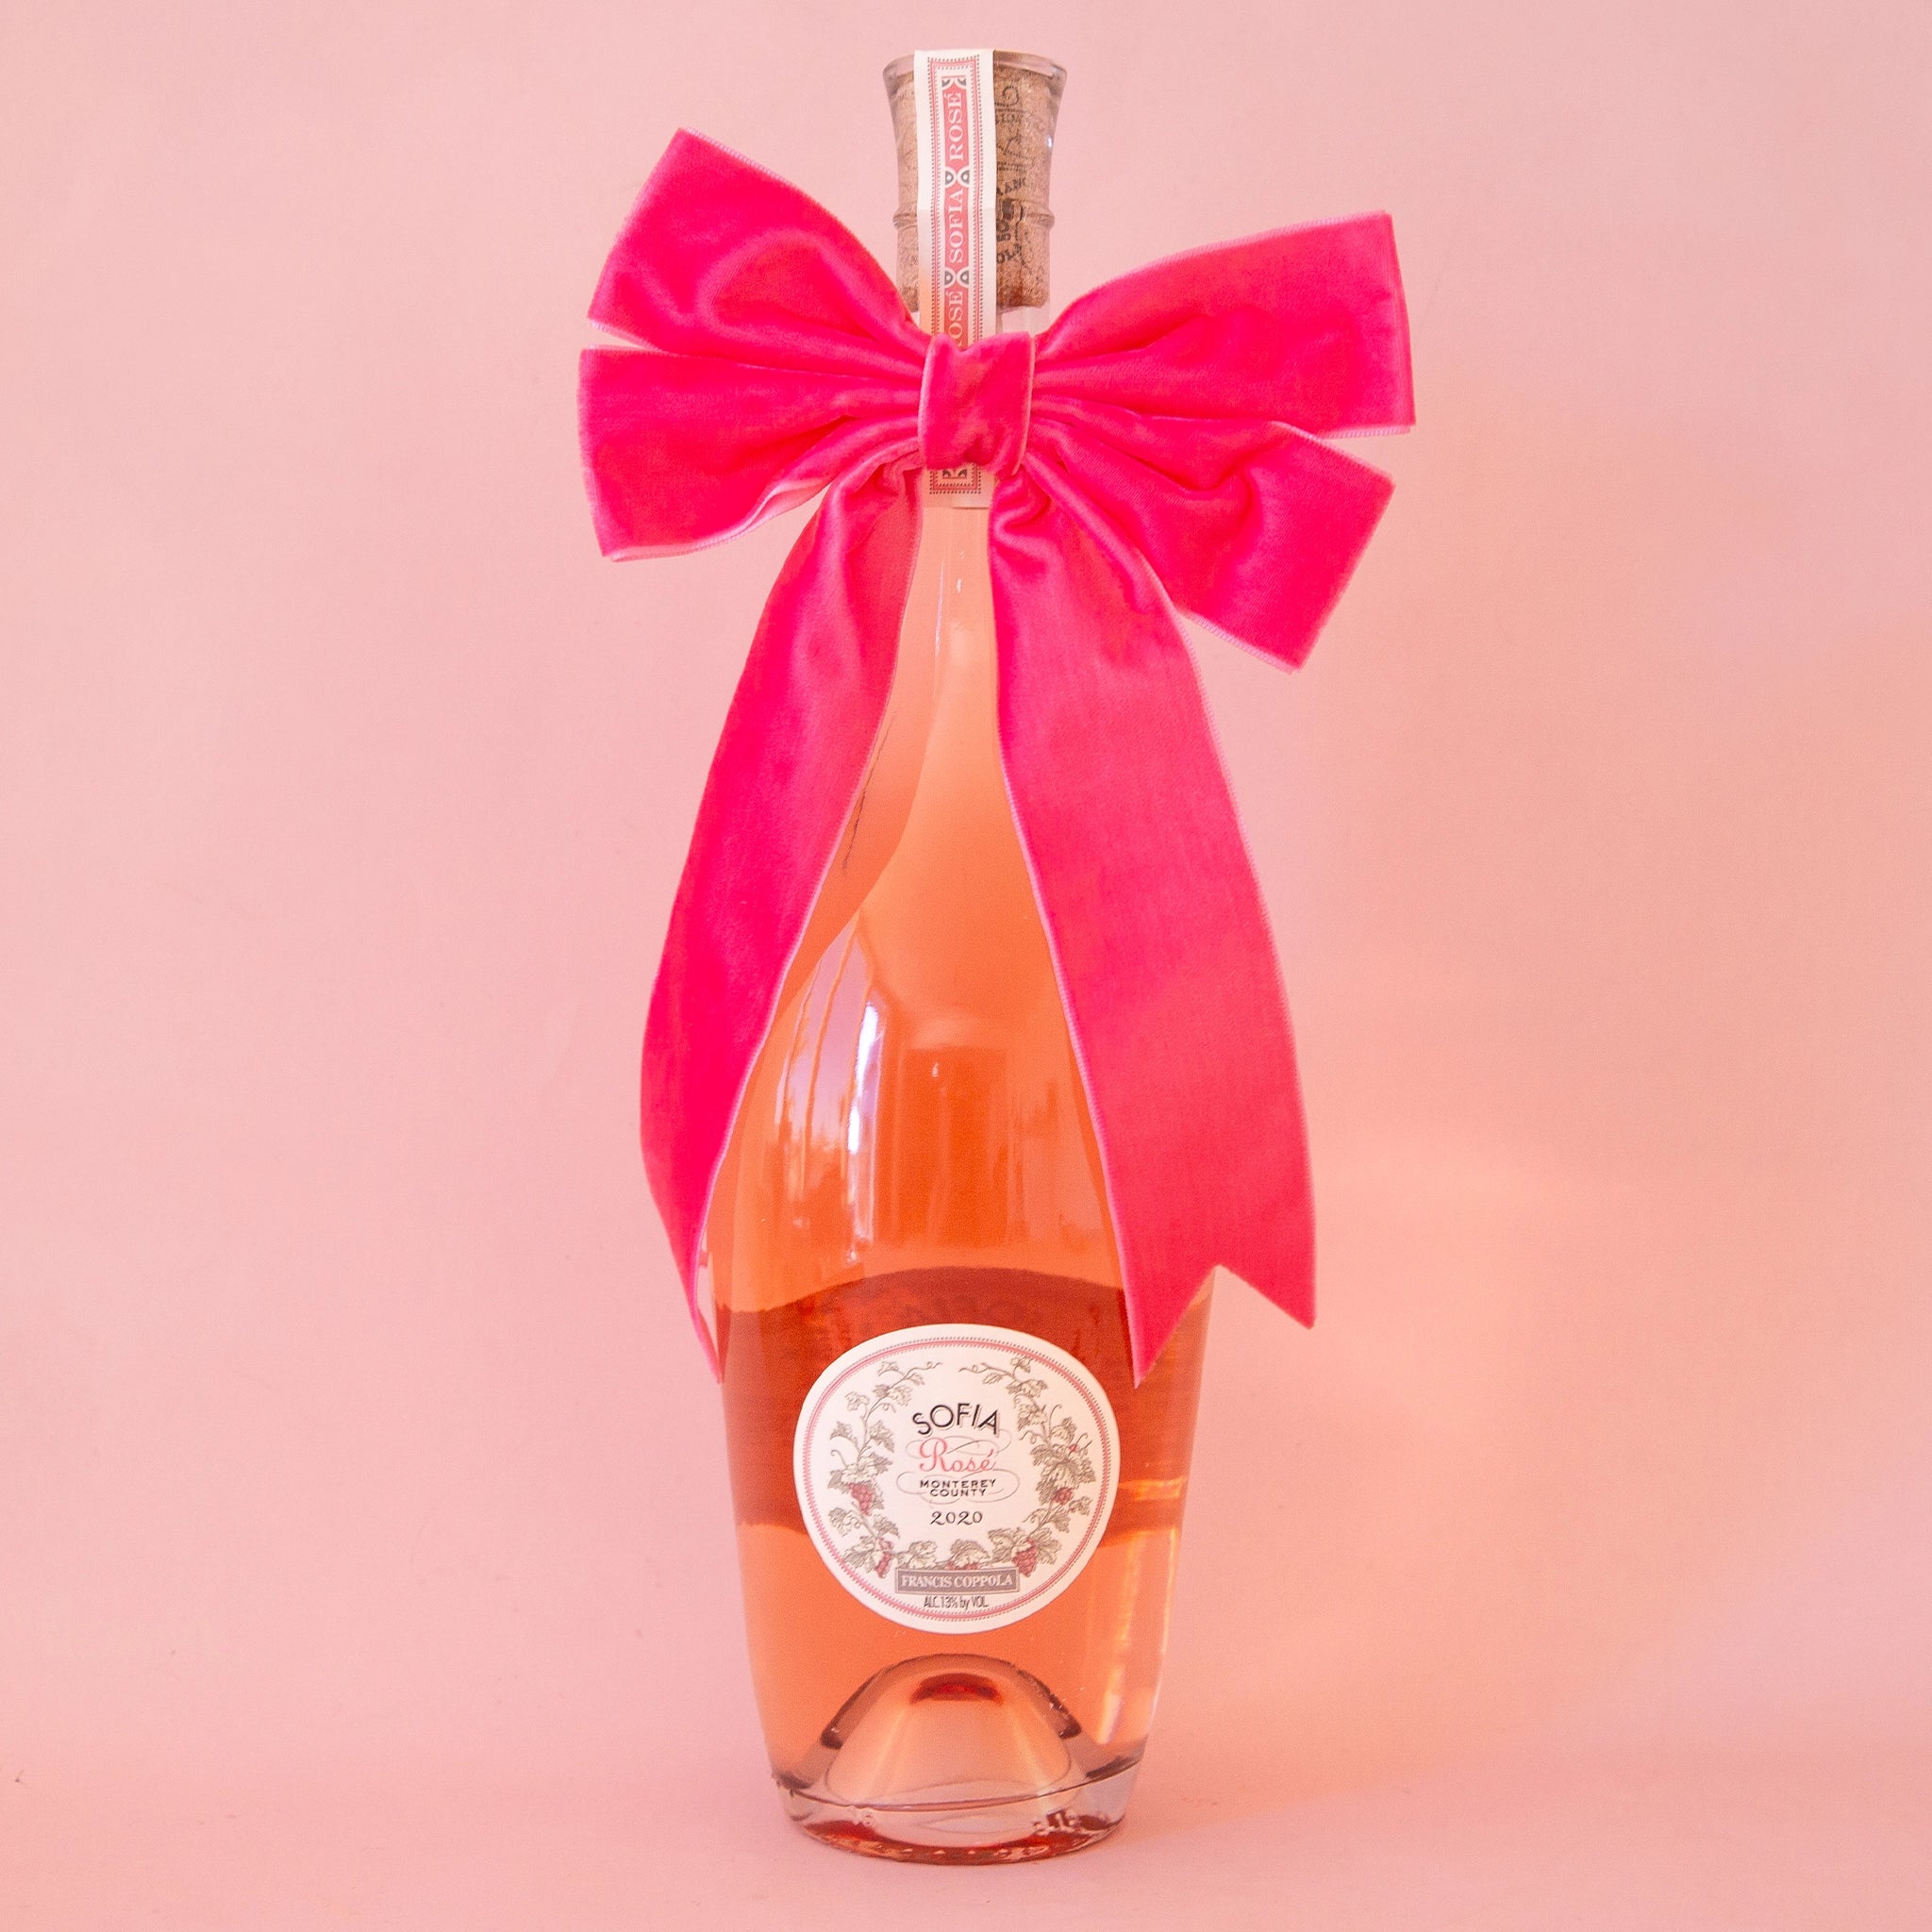 On a peachy background is a wine bottle with a large velvet pink bow